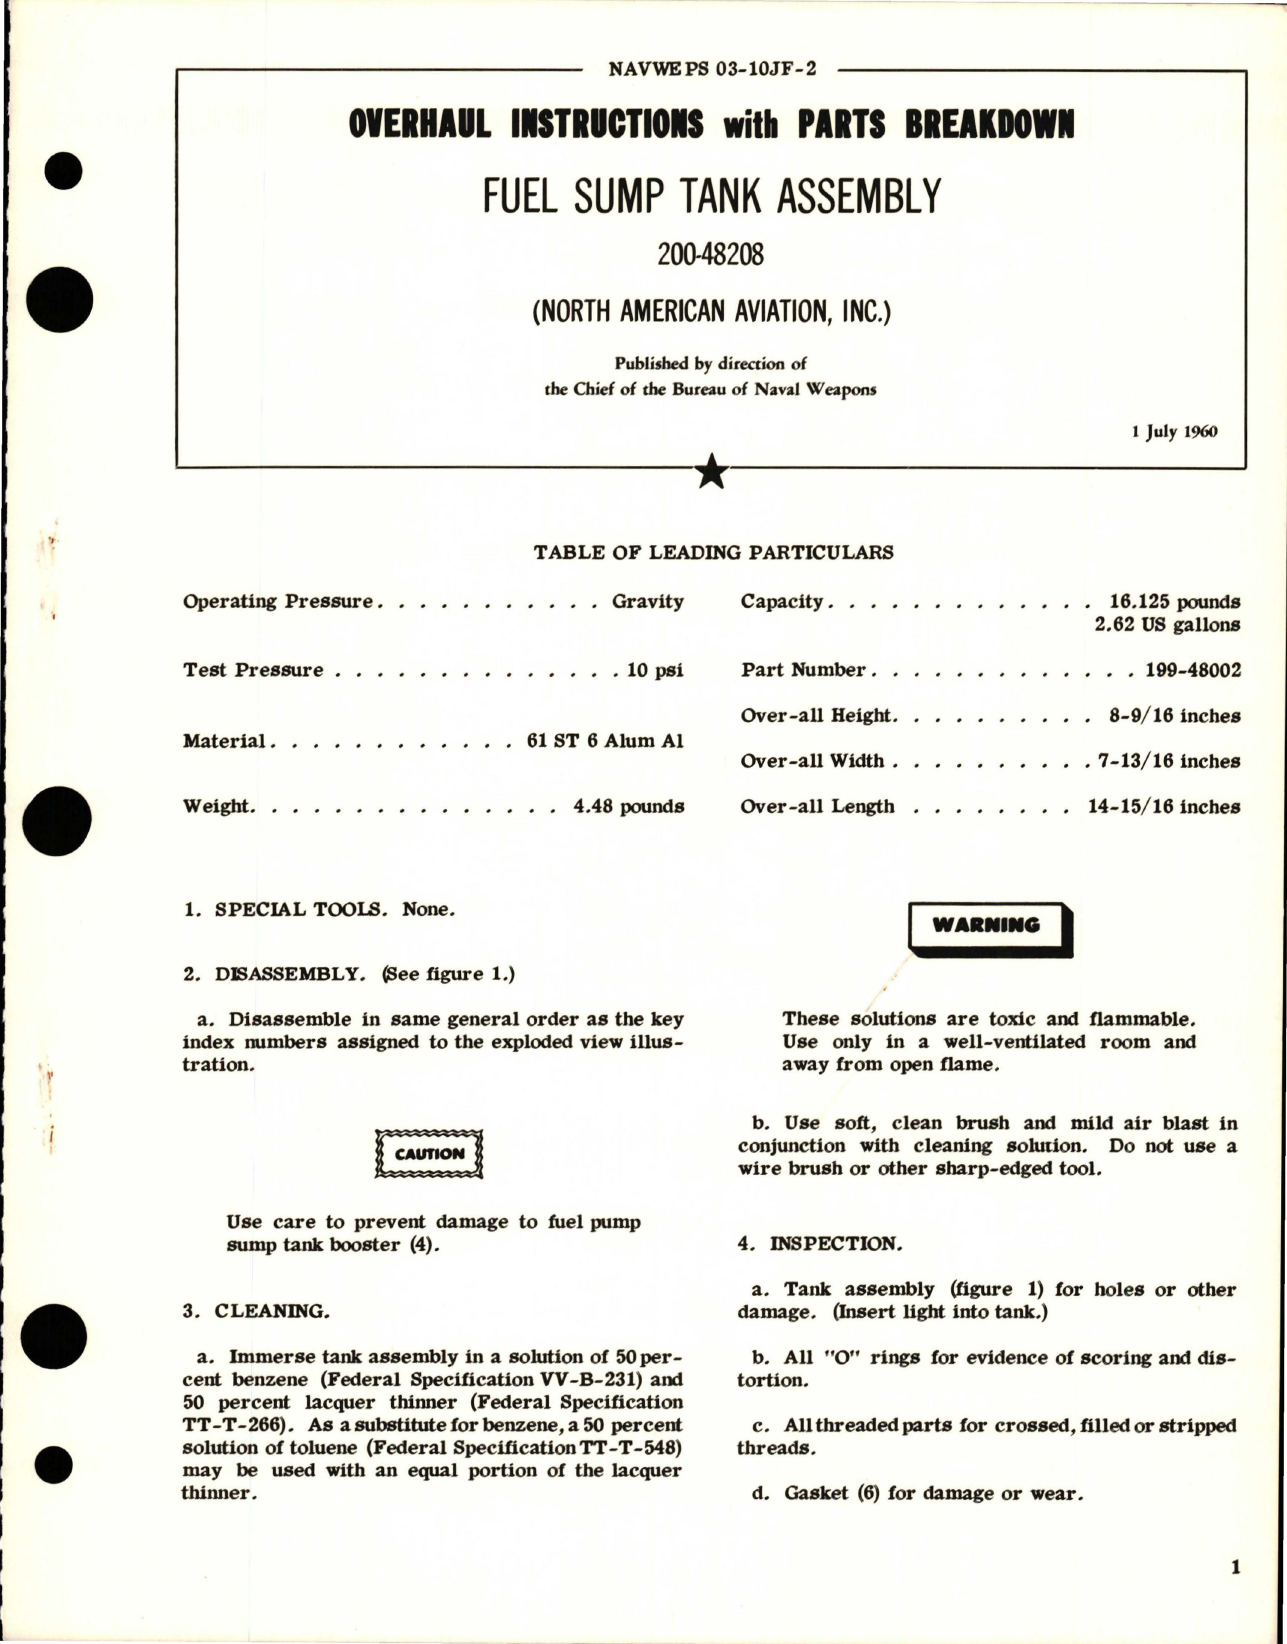 Sample page 1 from AirCorps Library document: Overhaul Instructions with Parts Breakdown for Fuel Sump Tank Assembly - 200-48208 